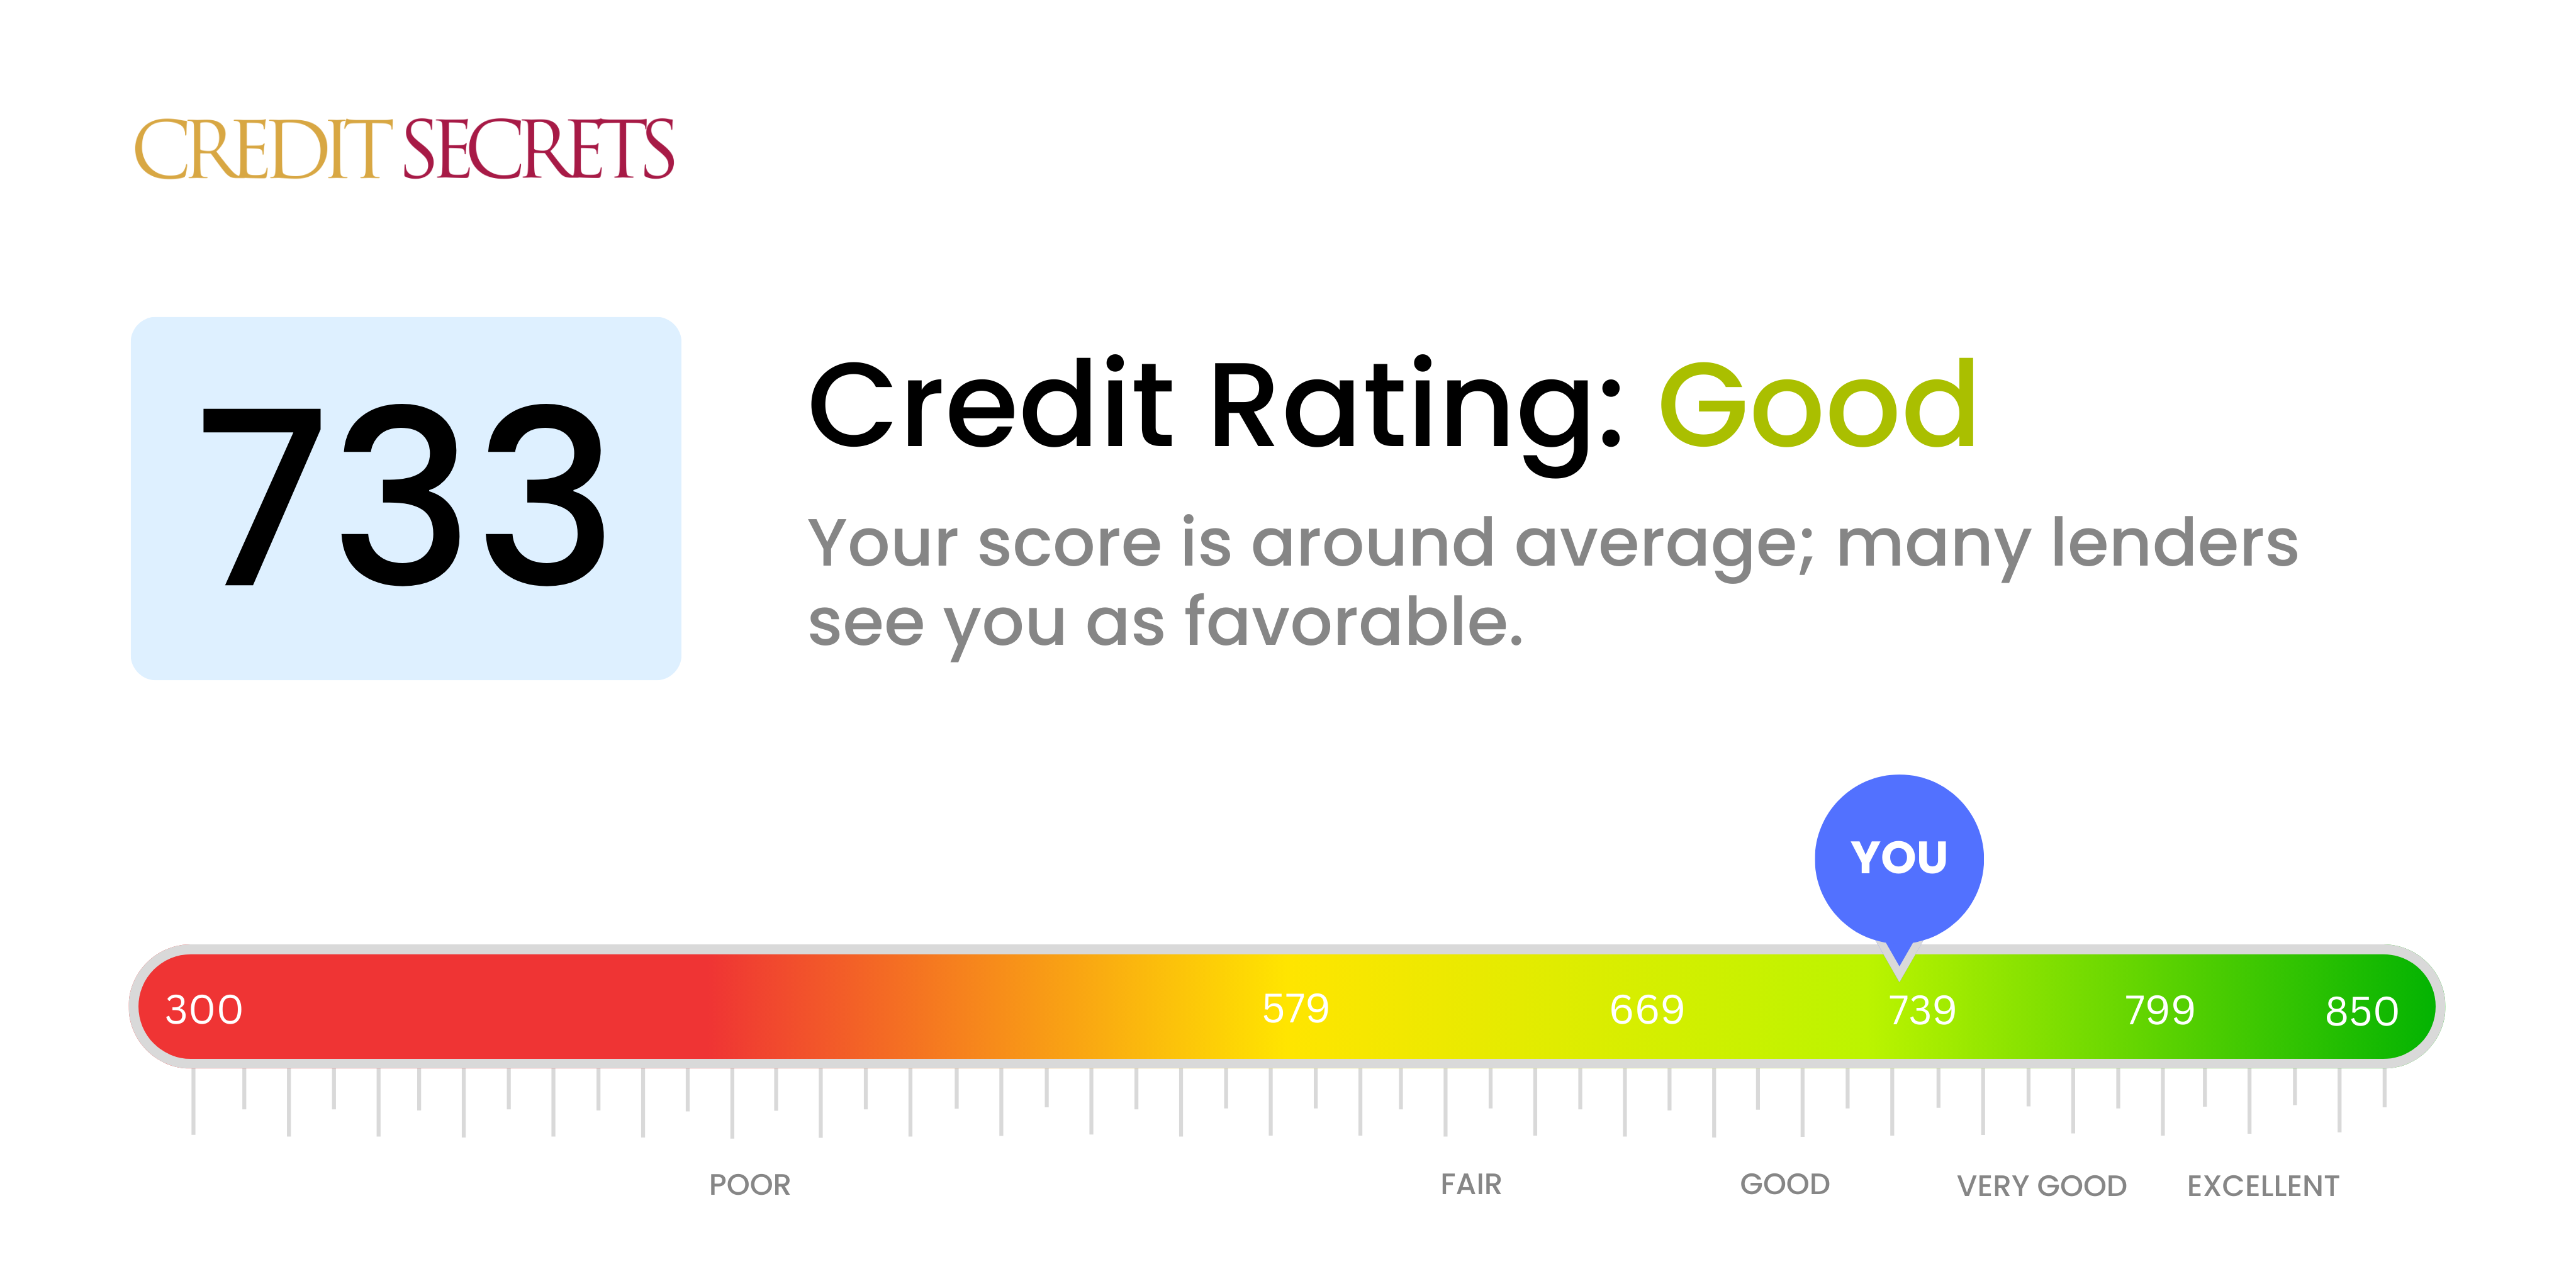 Is 733 a good credit score?